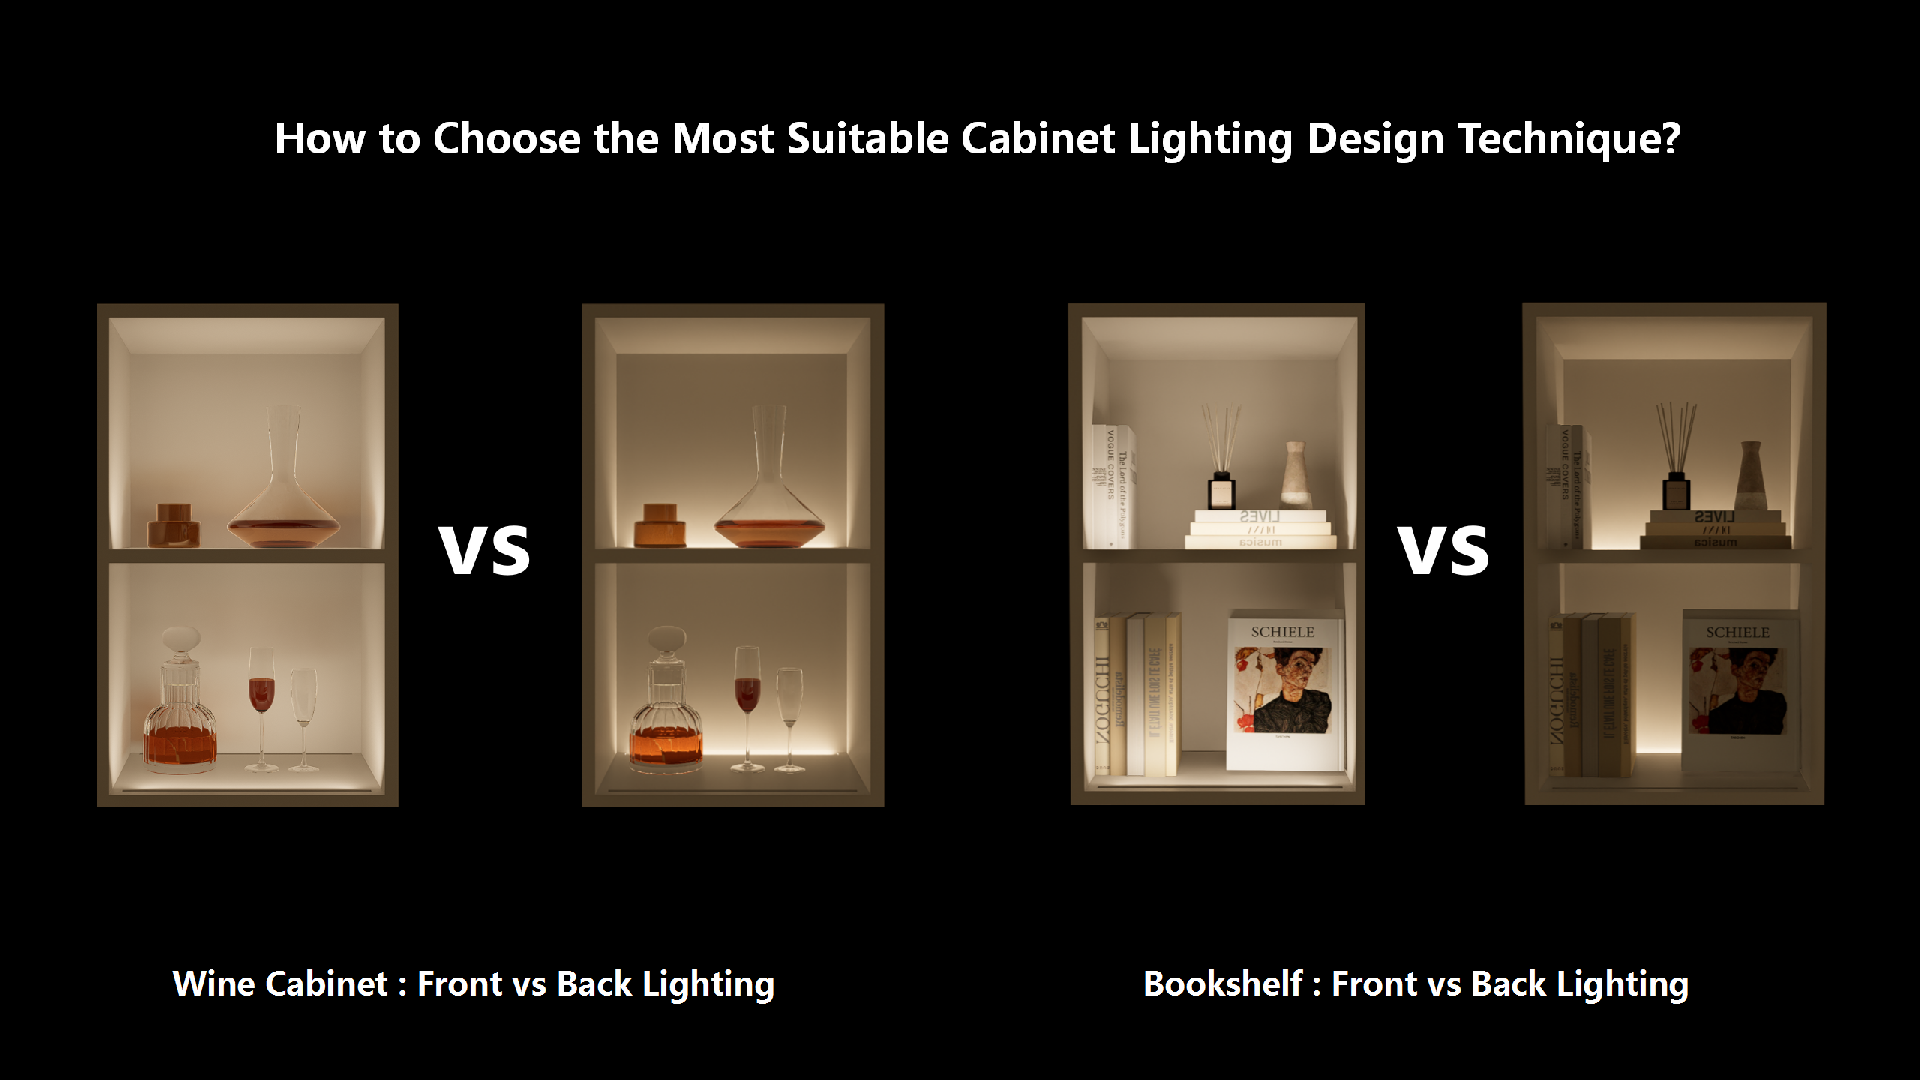 How to Choose the Most Suitable Cabinet Lighting Design Technique?